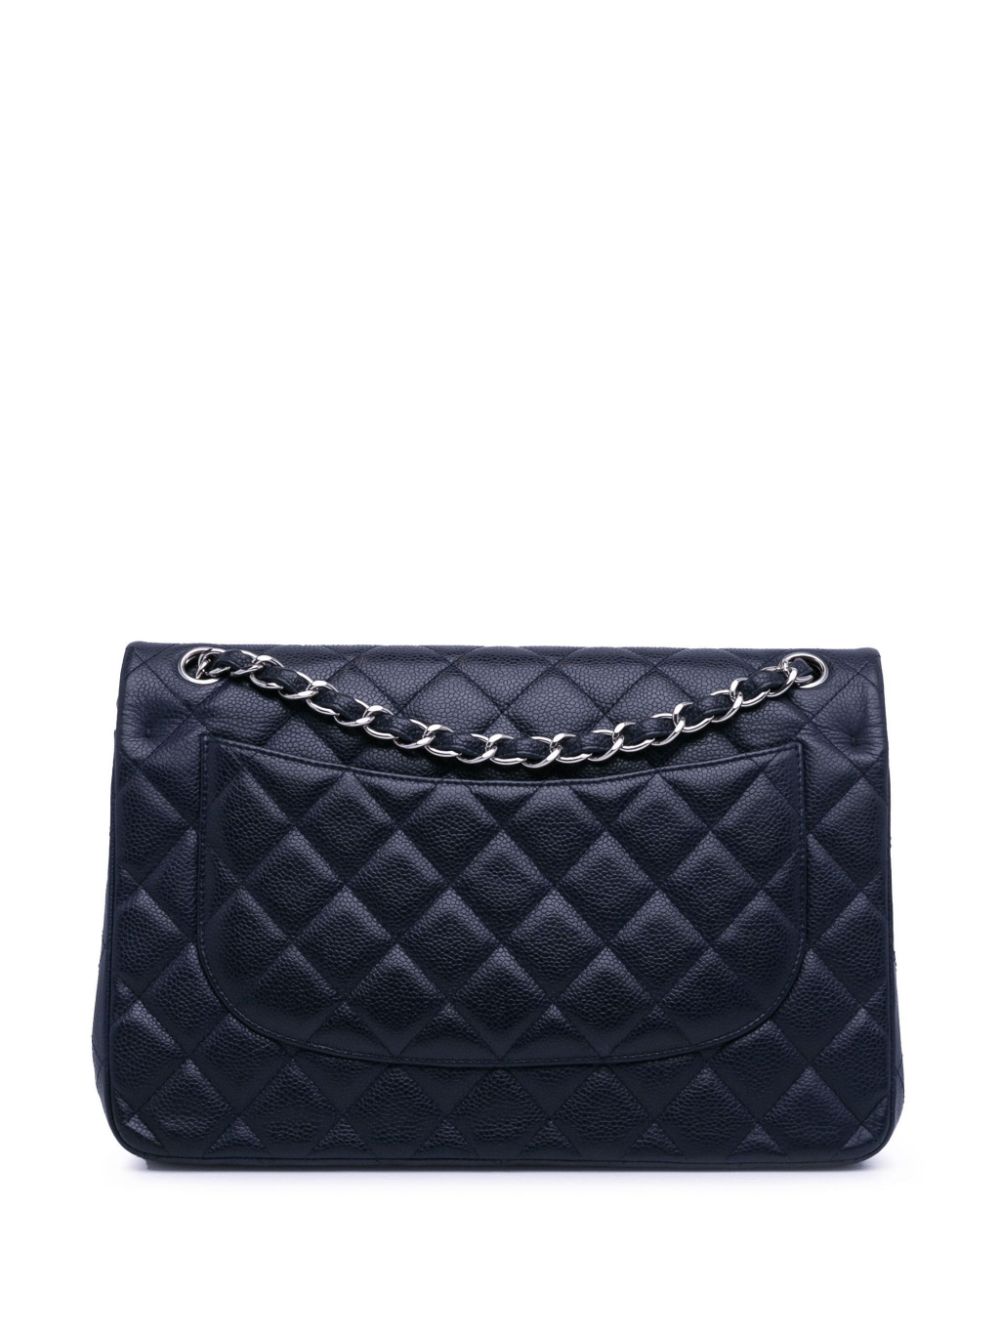 Pre-owned Chanel 2014   Jumbo Classic Caviar Double Flap Shoulder Bag In Blue